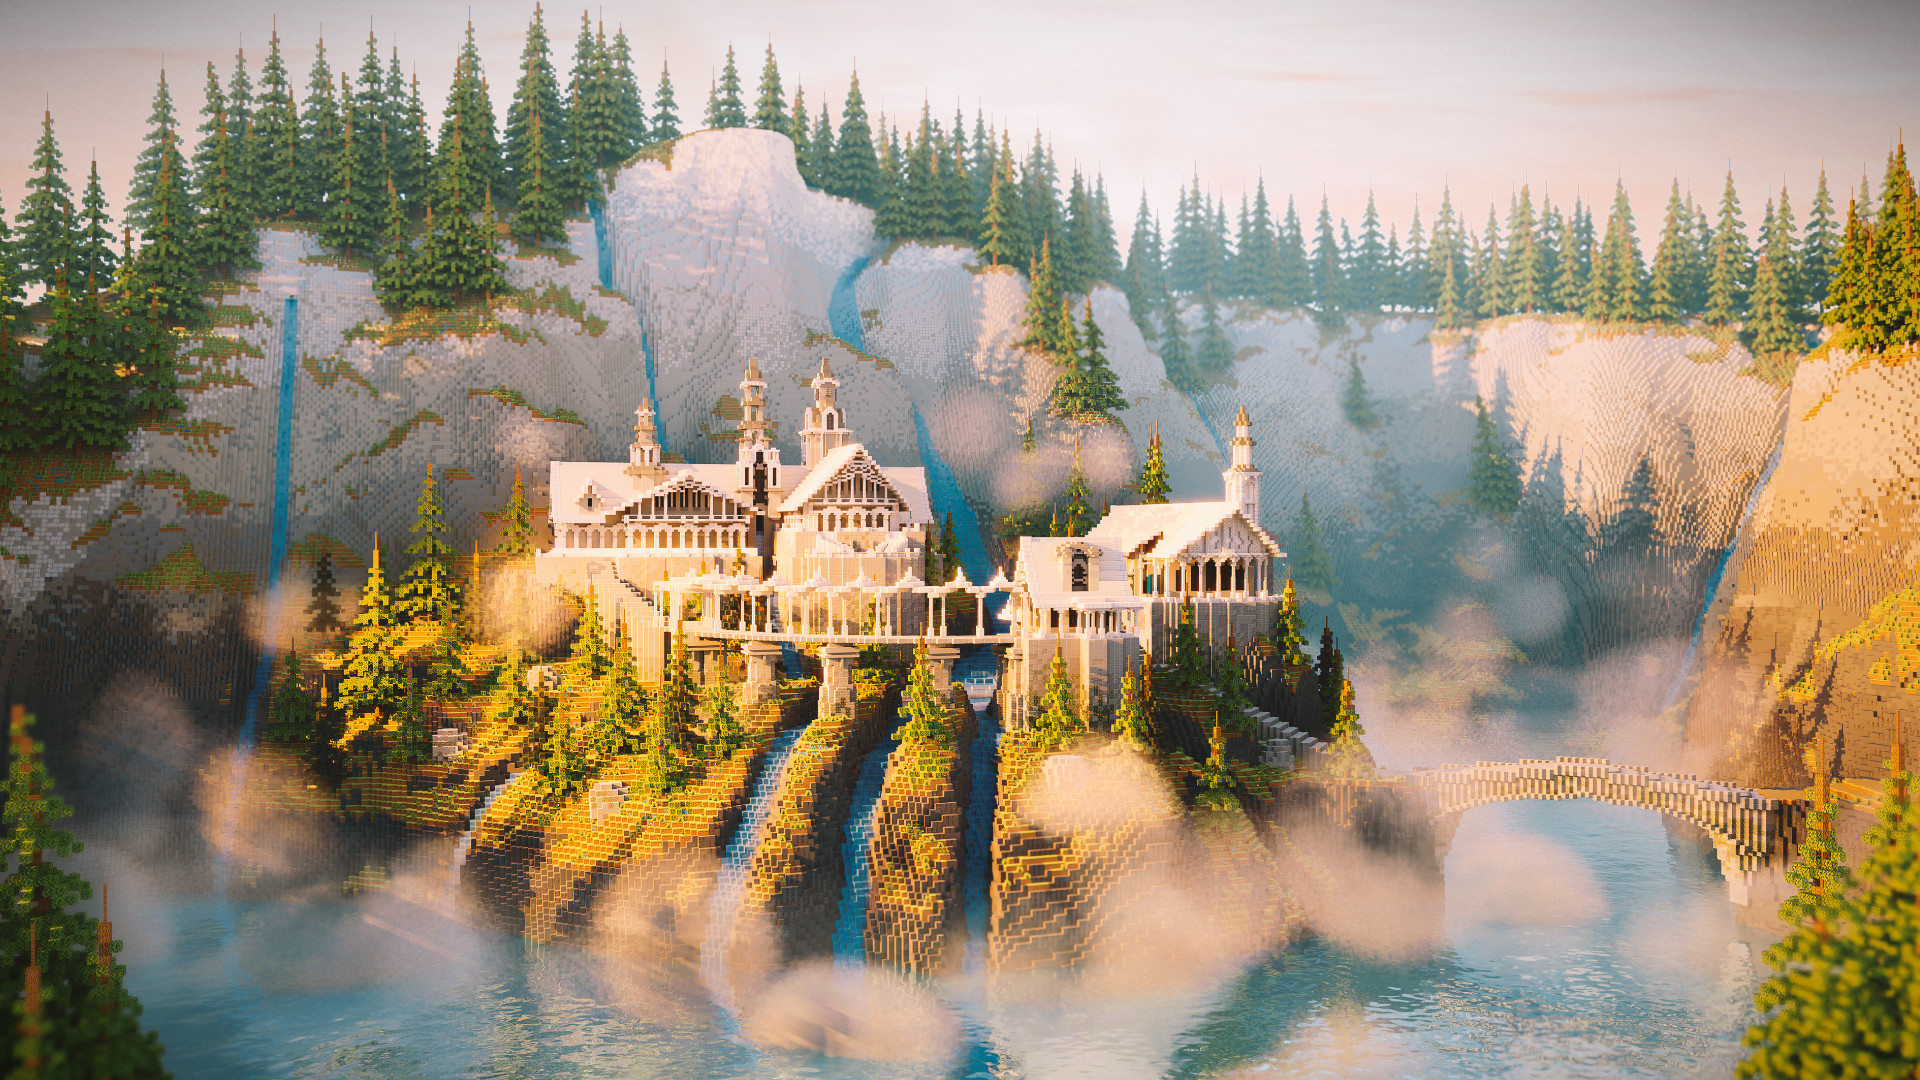 Minecraft player spends weeks recreating Rivendell from Lord of the Rings